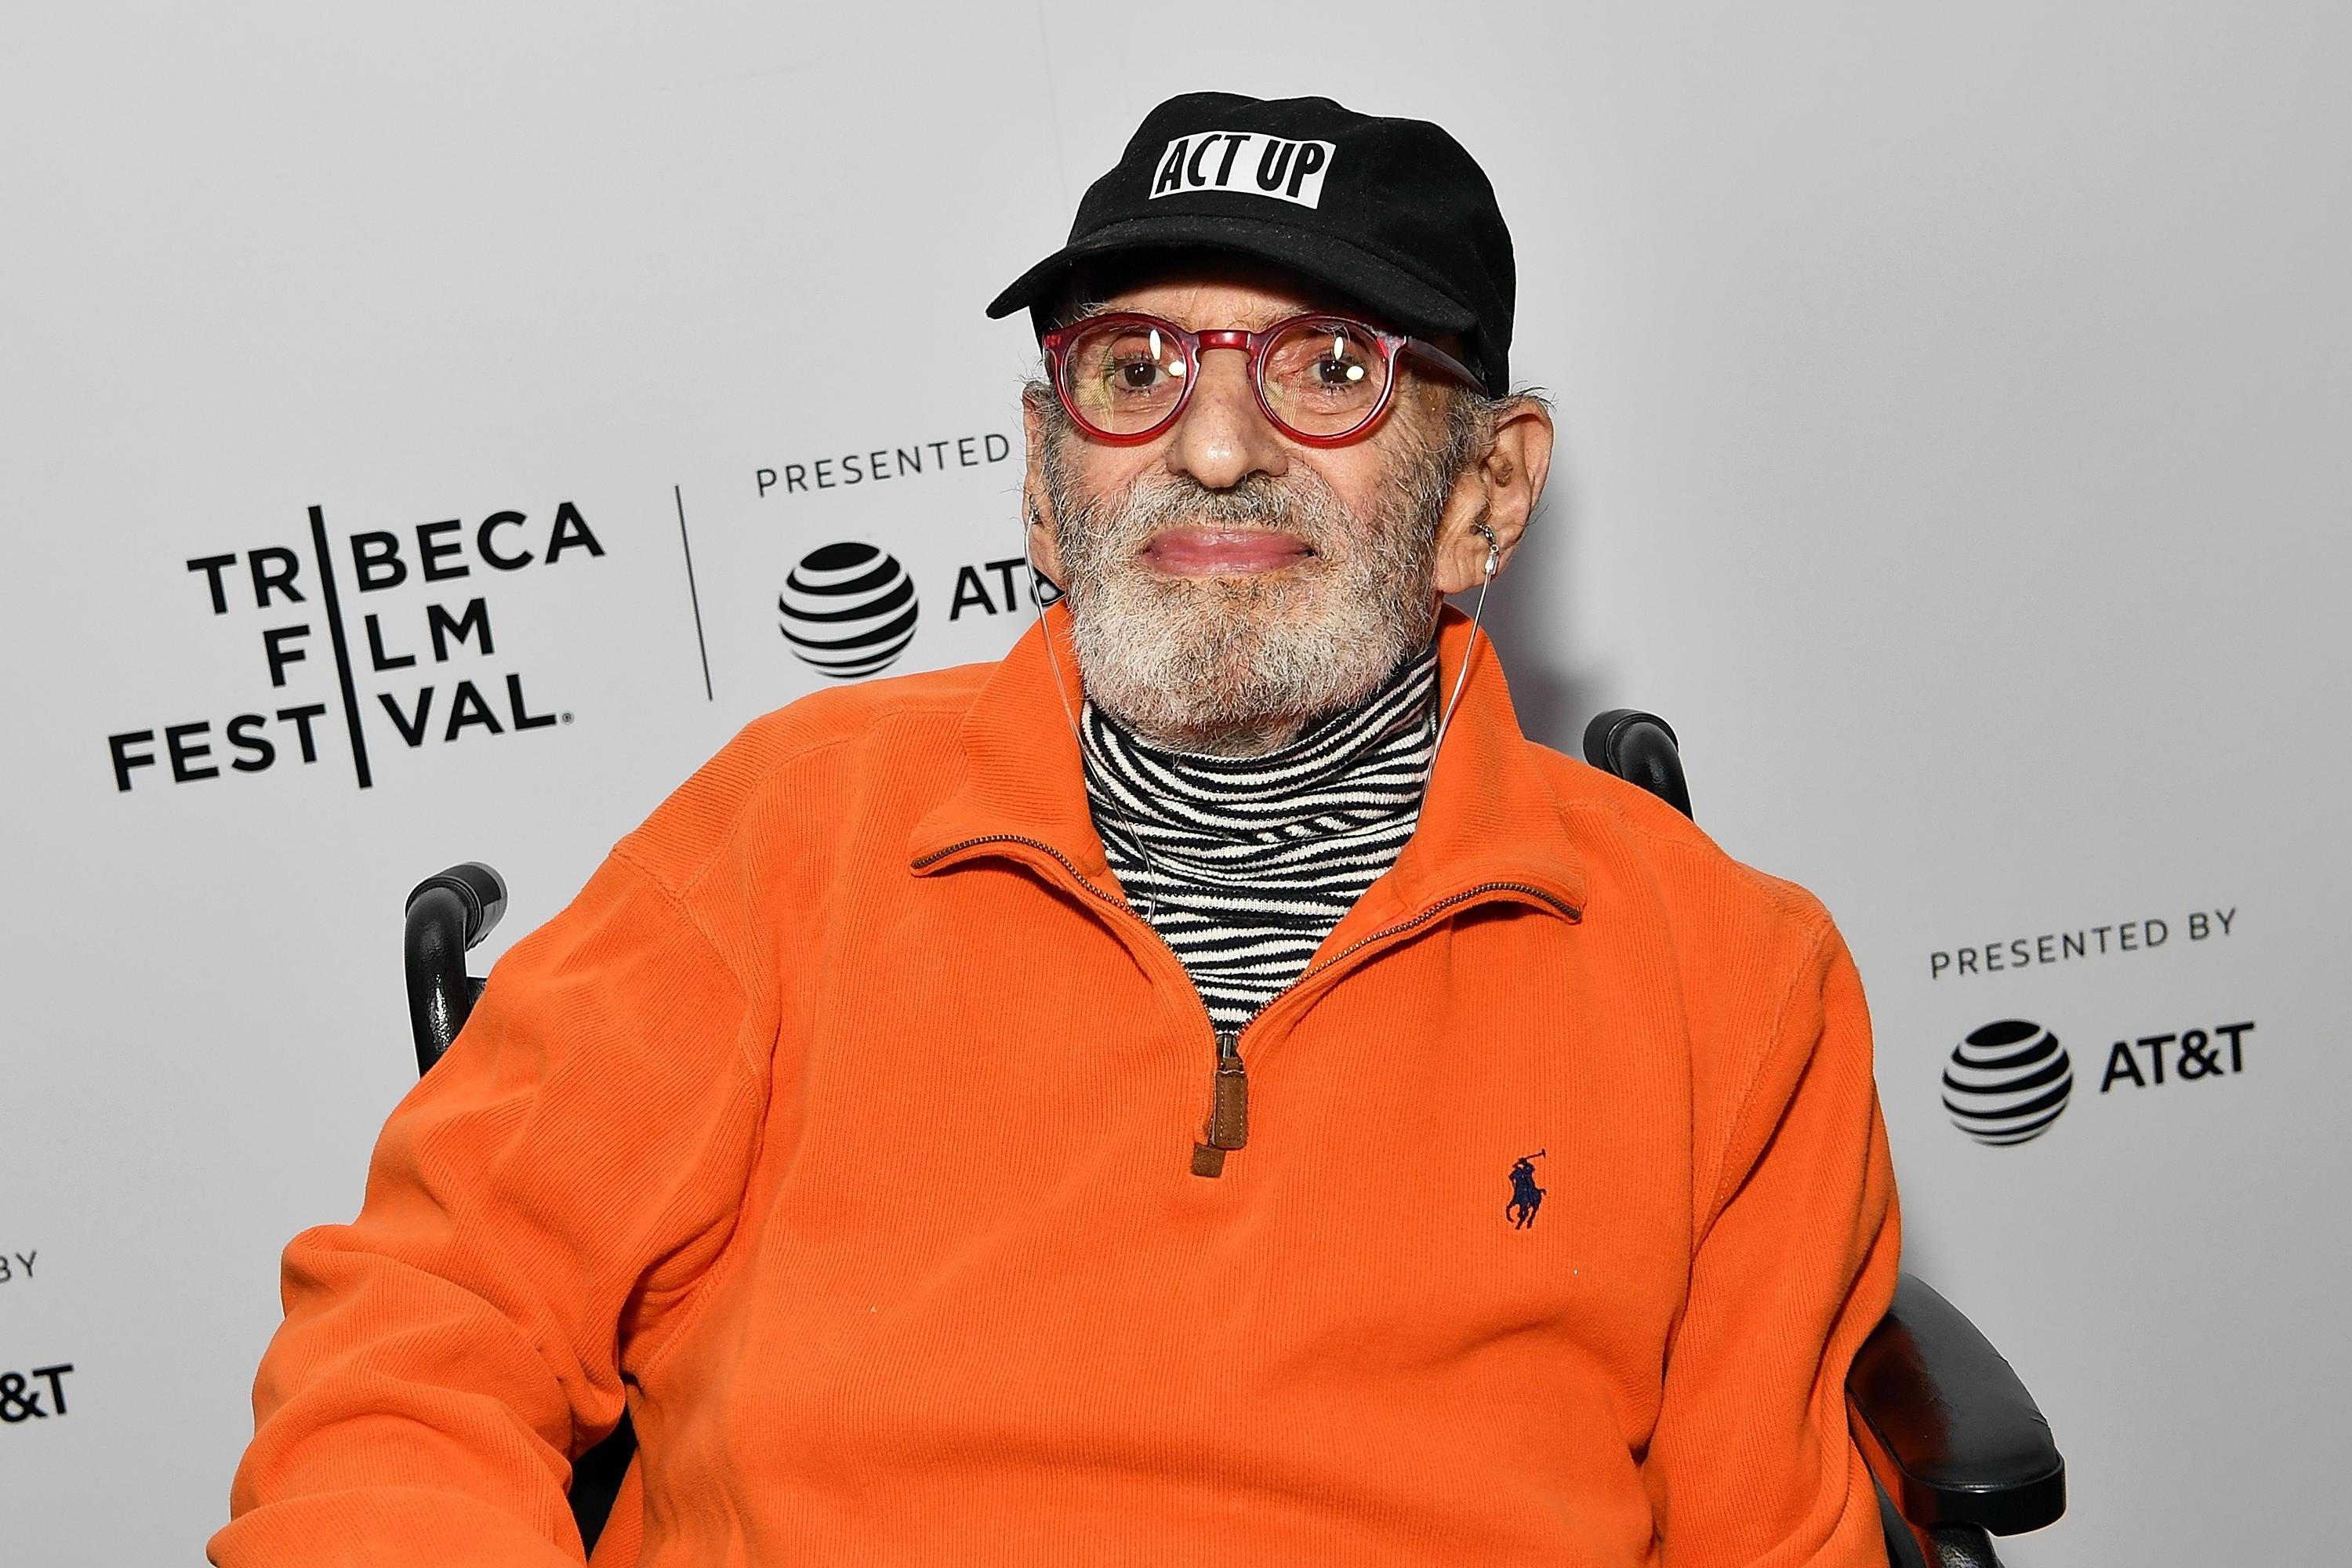 Larry Kramer seated in front of a Tribeca festival backdrop.